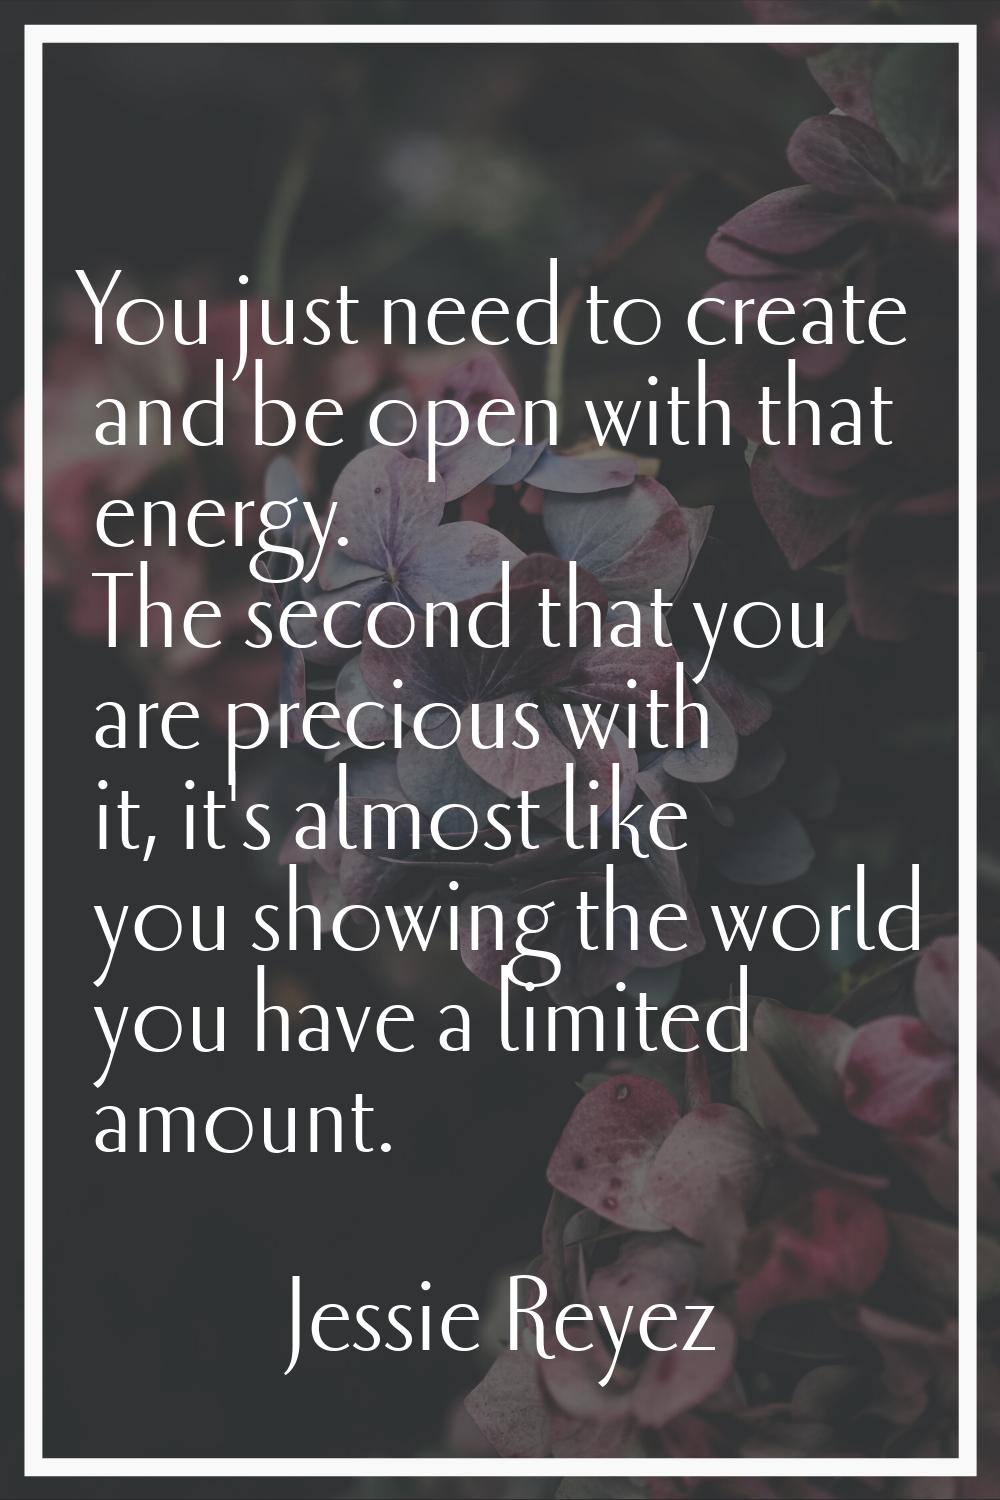 You just need to create and be open with that energy. The second that you are precious with it, it'